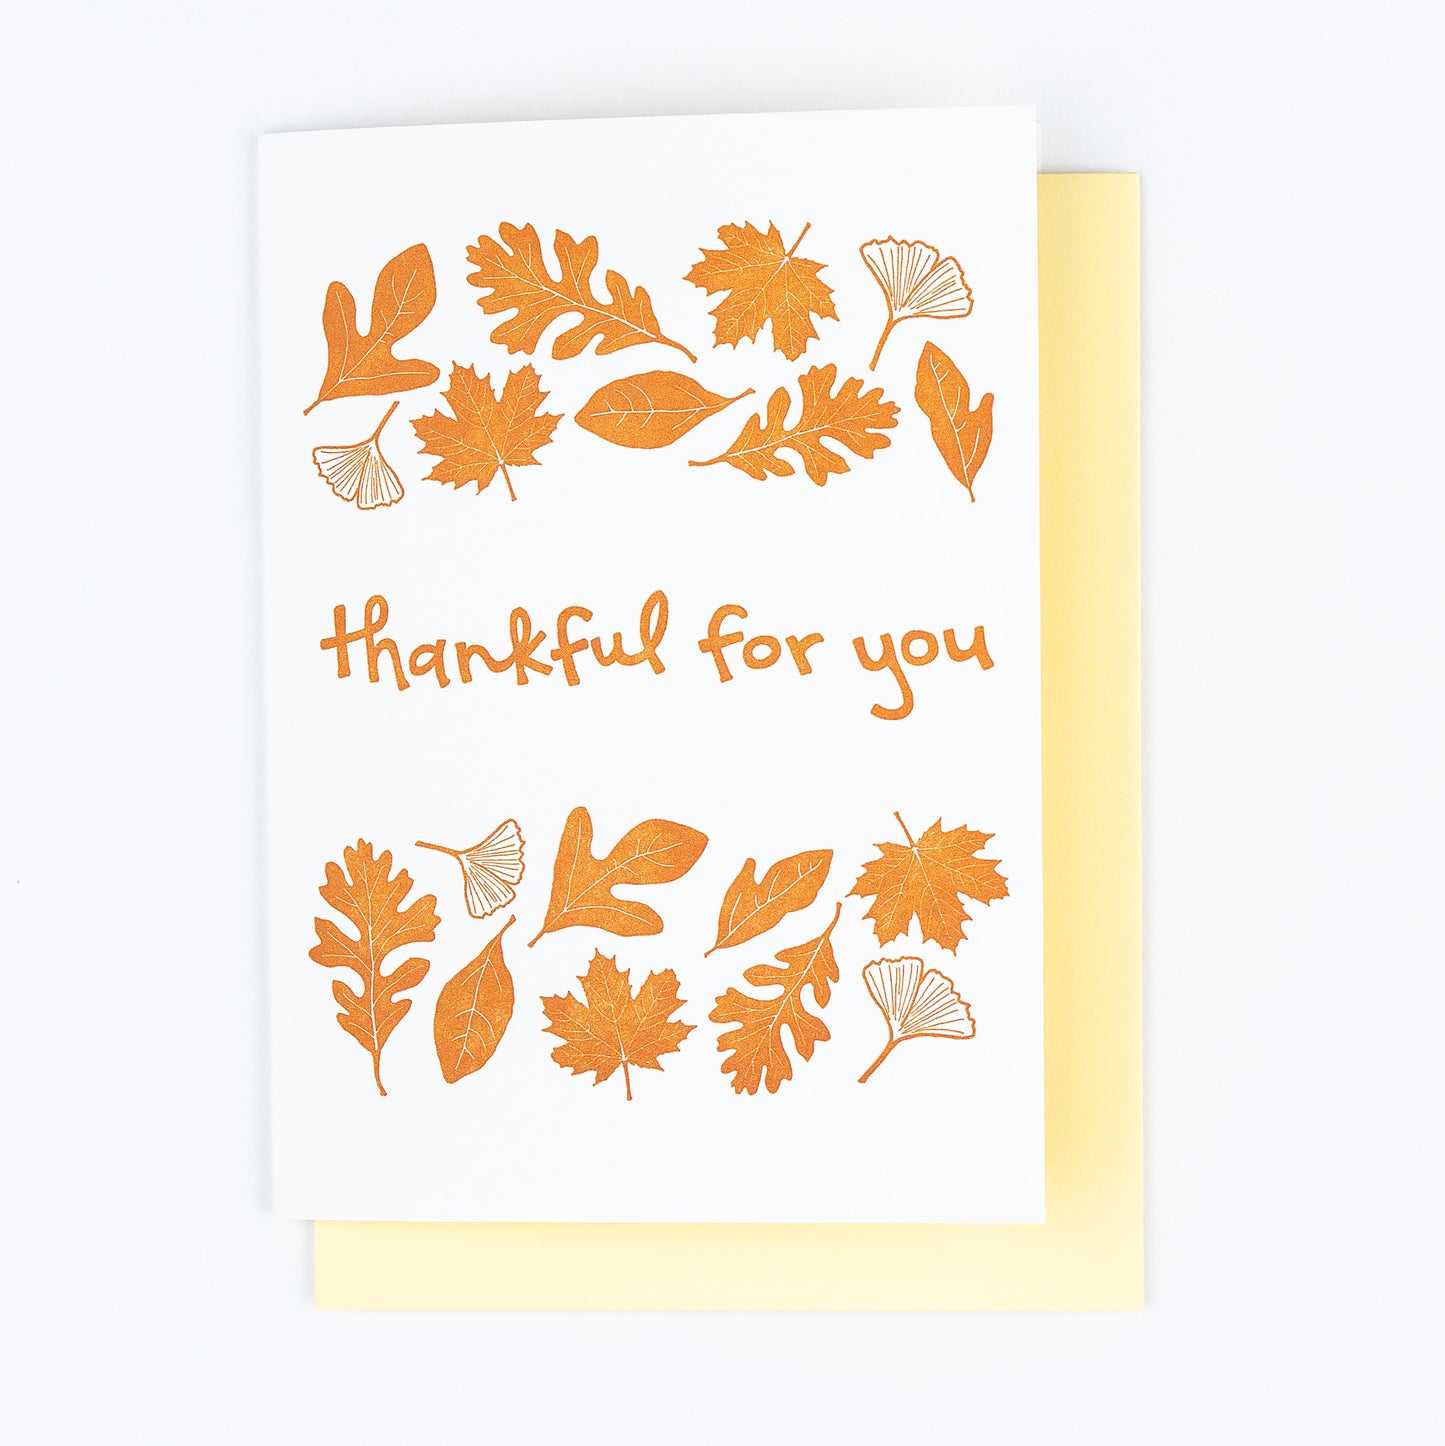 Thank You Letterpress Greeting Card: Autumn Leaves "Thankful for You"